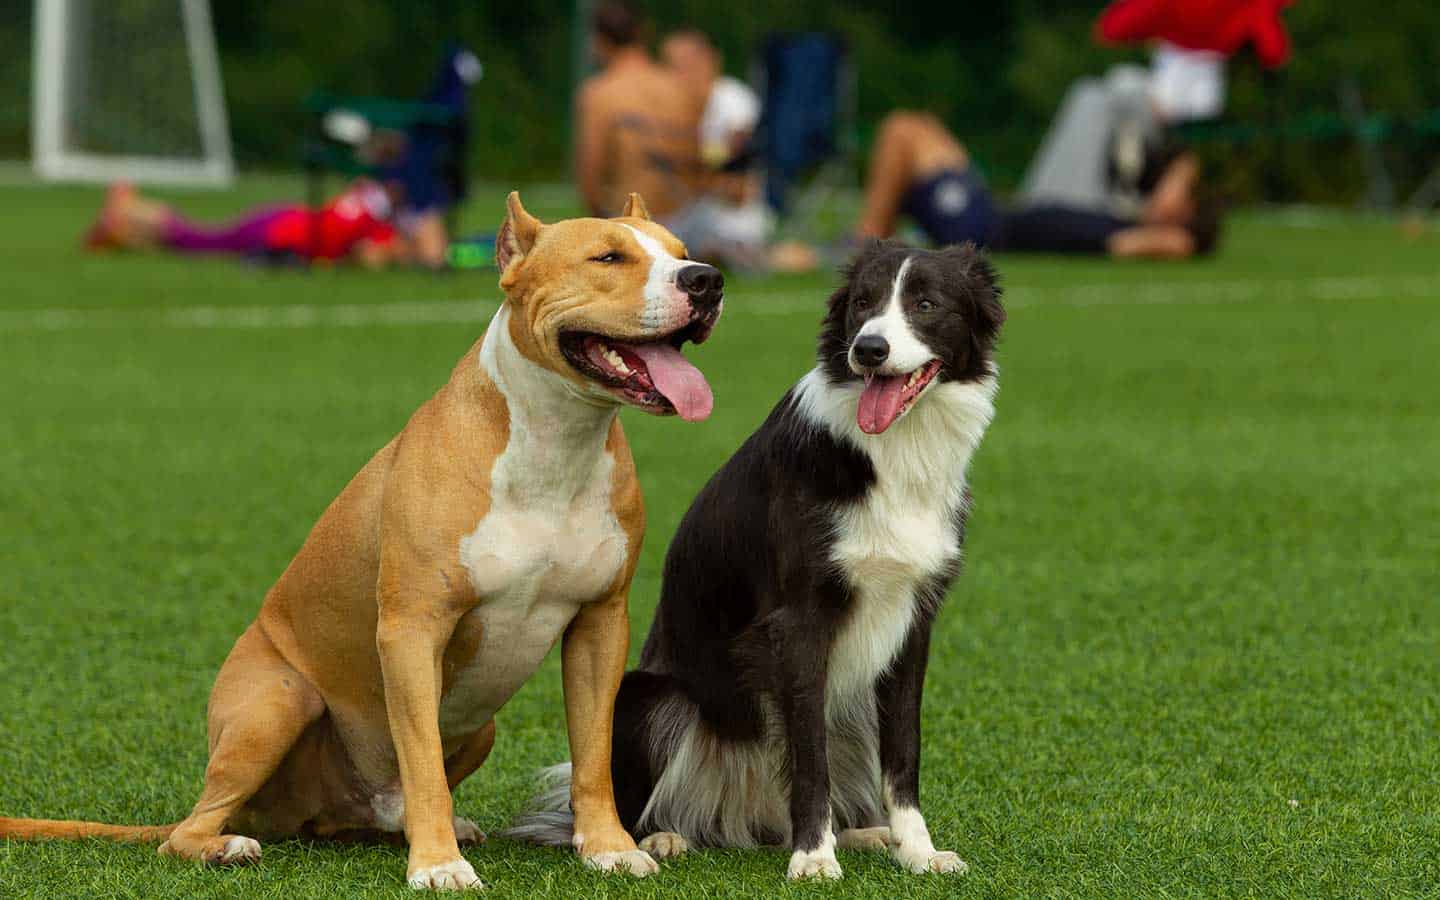 Elmira off-leash dog park set for its official opening on June 7